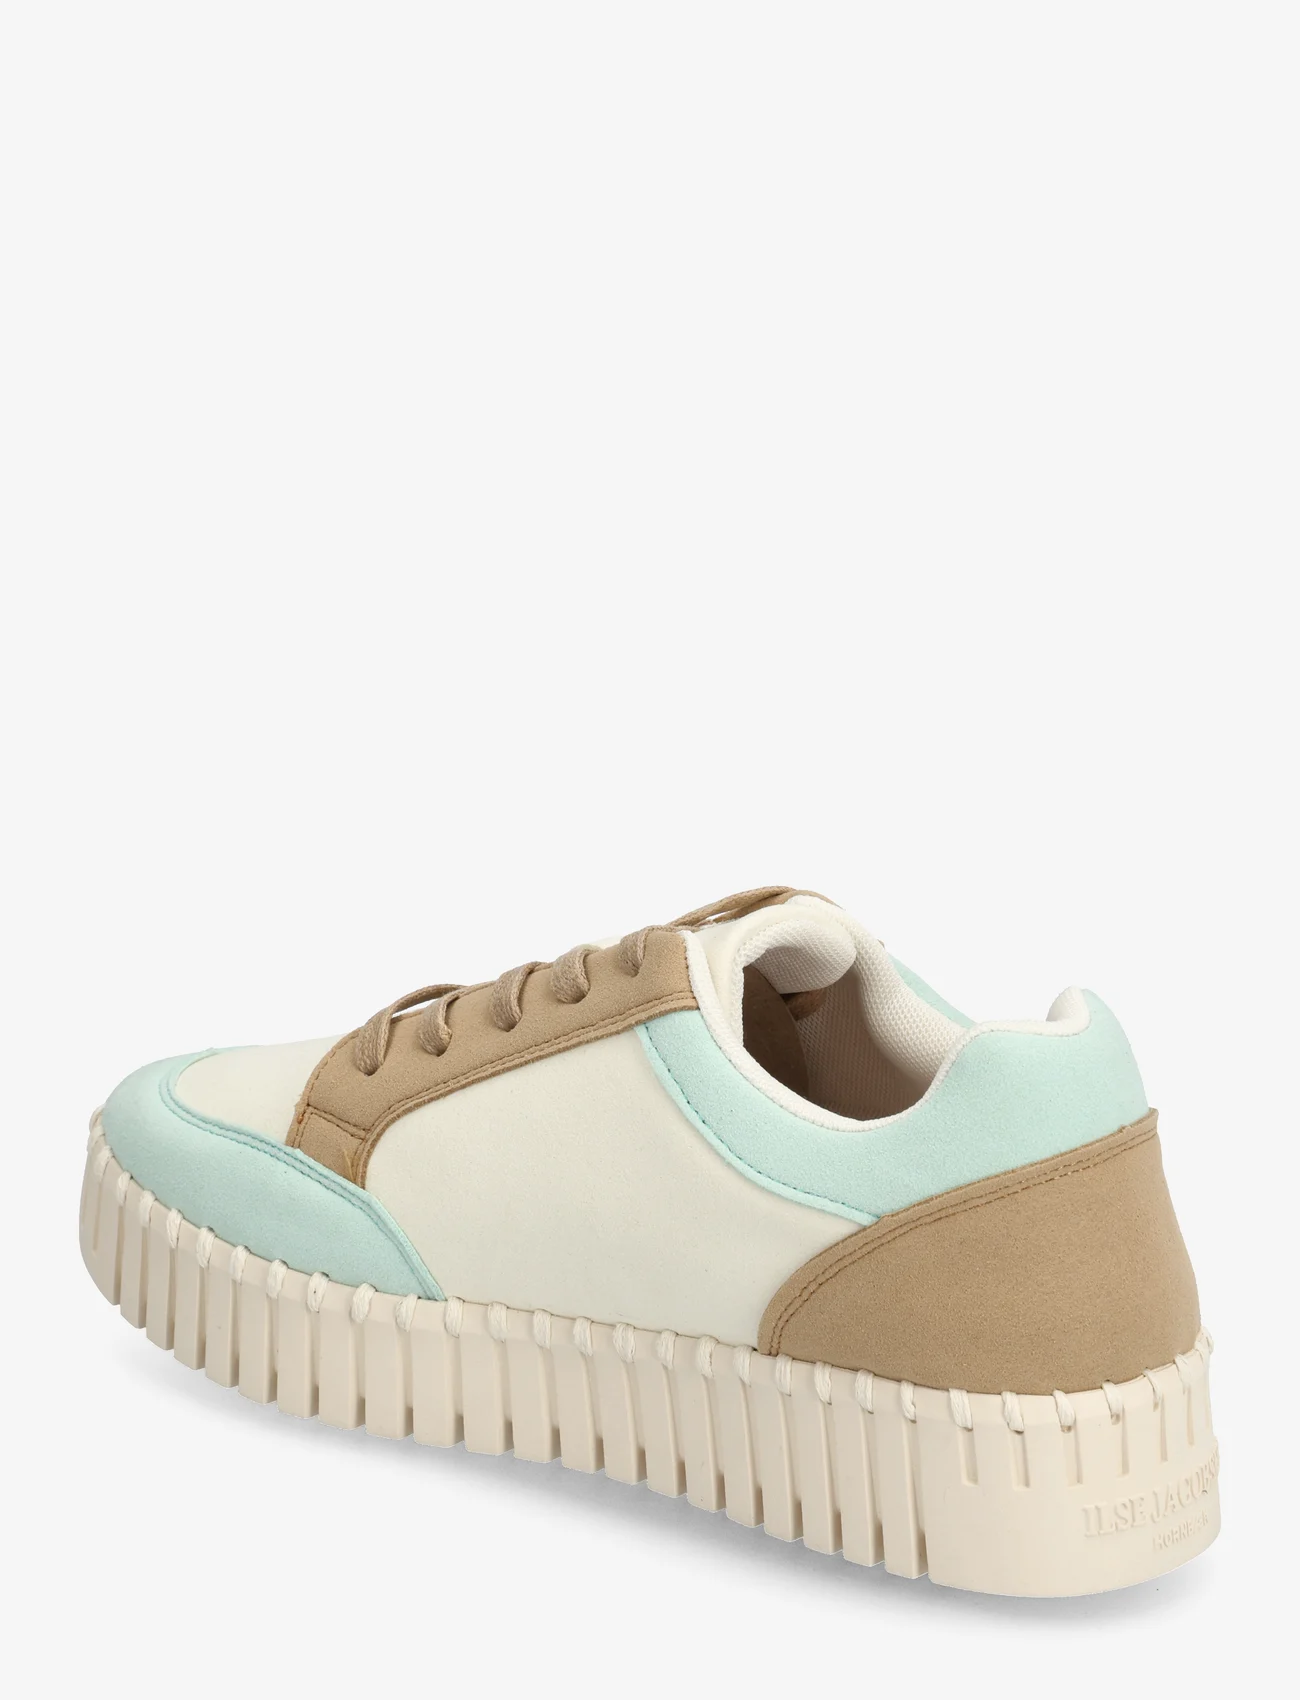 Ilse Jacobsen - Sneakers - lave sneakers - 494 bok choy - 1